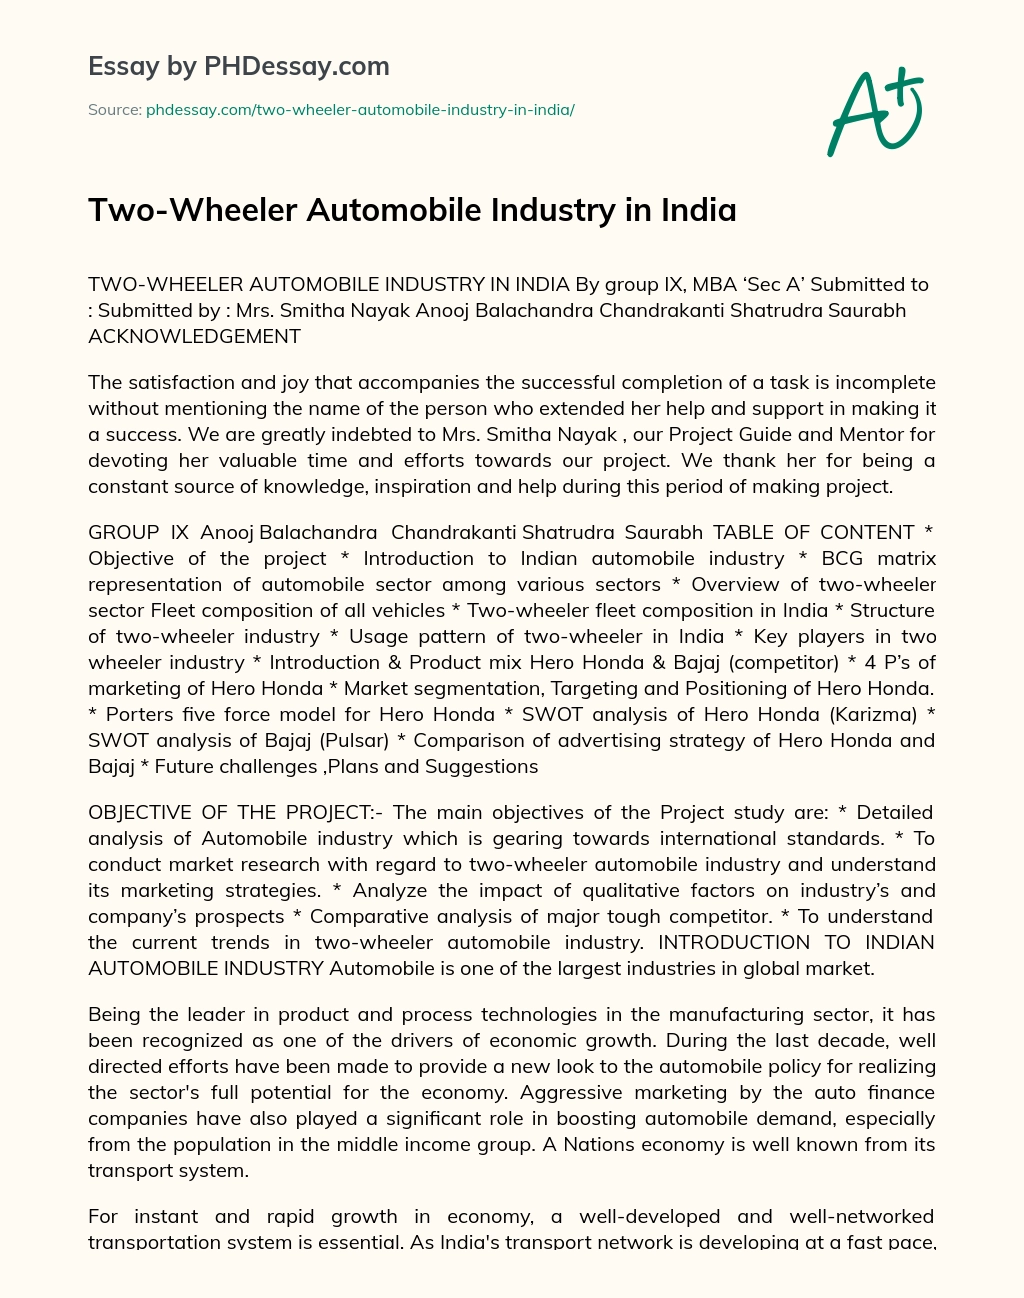 Two-Wheeler Automobile Industry in India essay